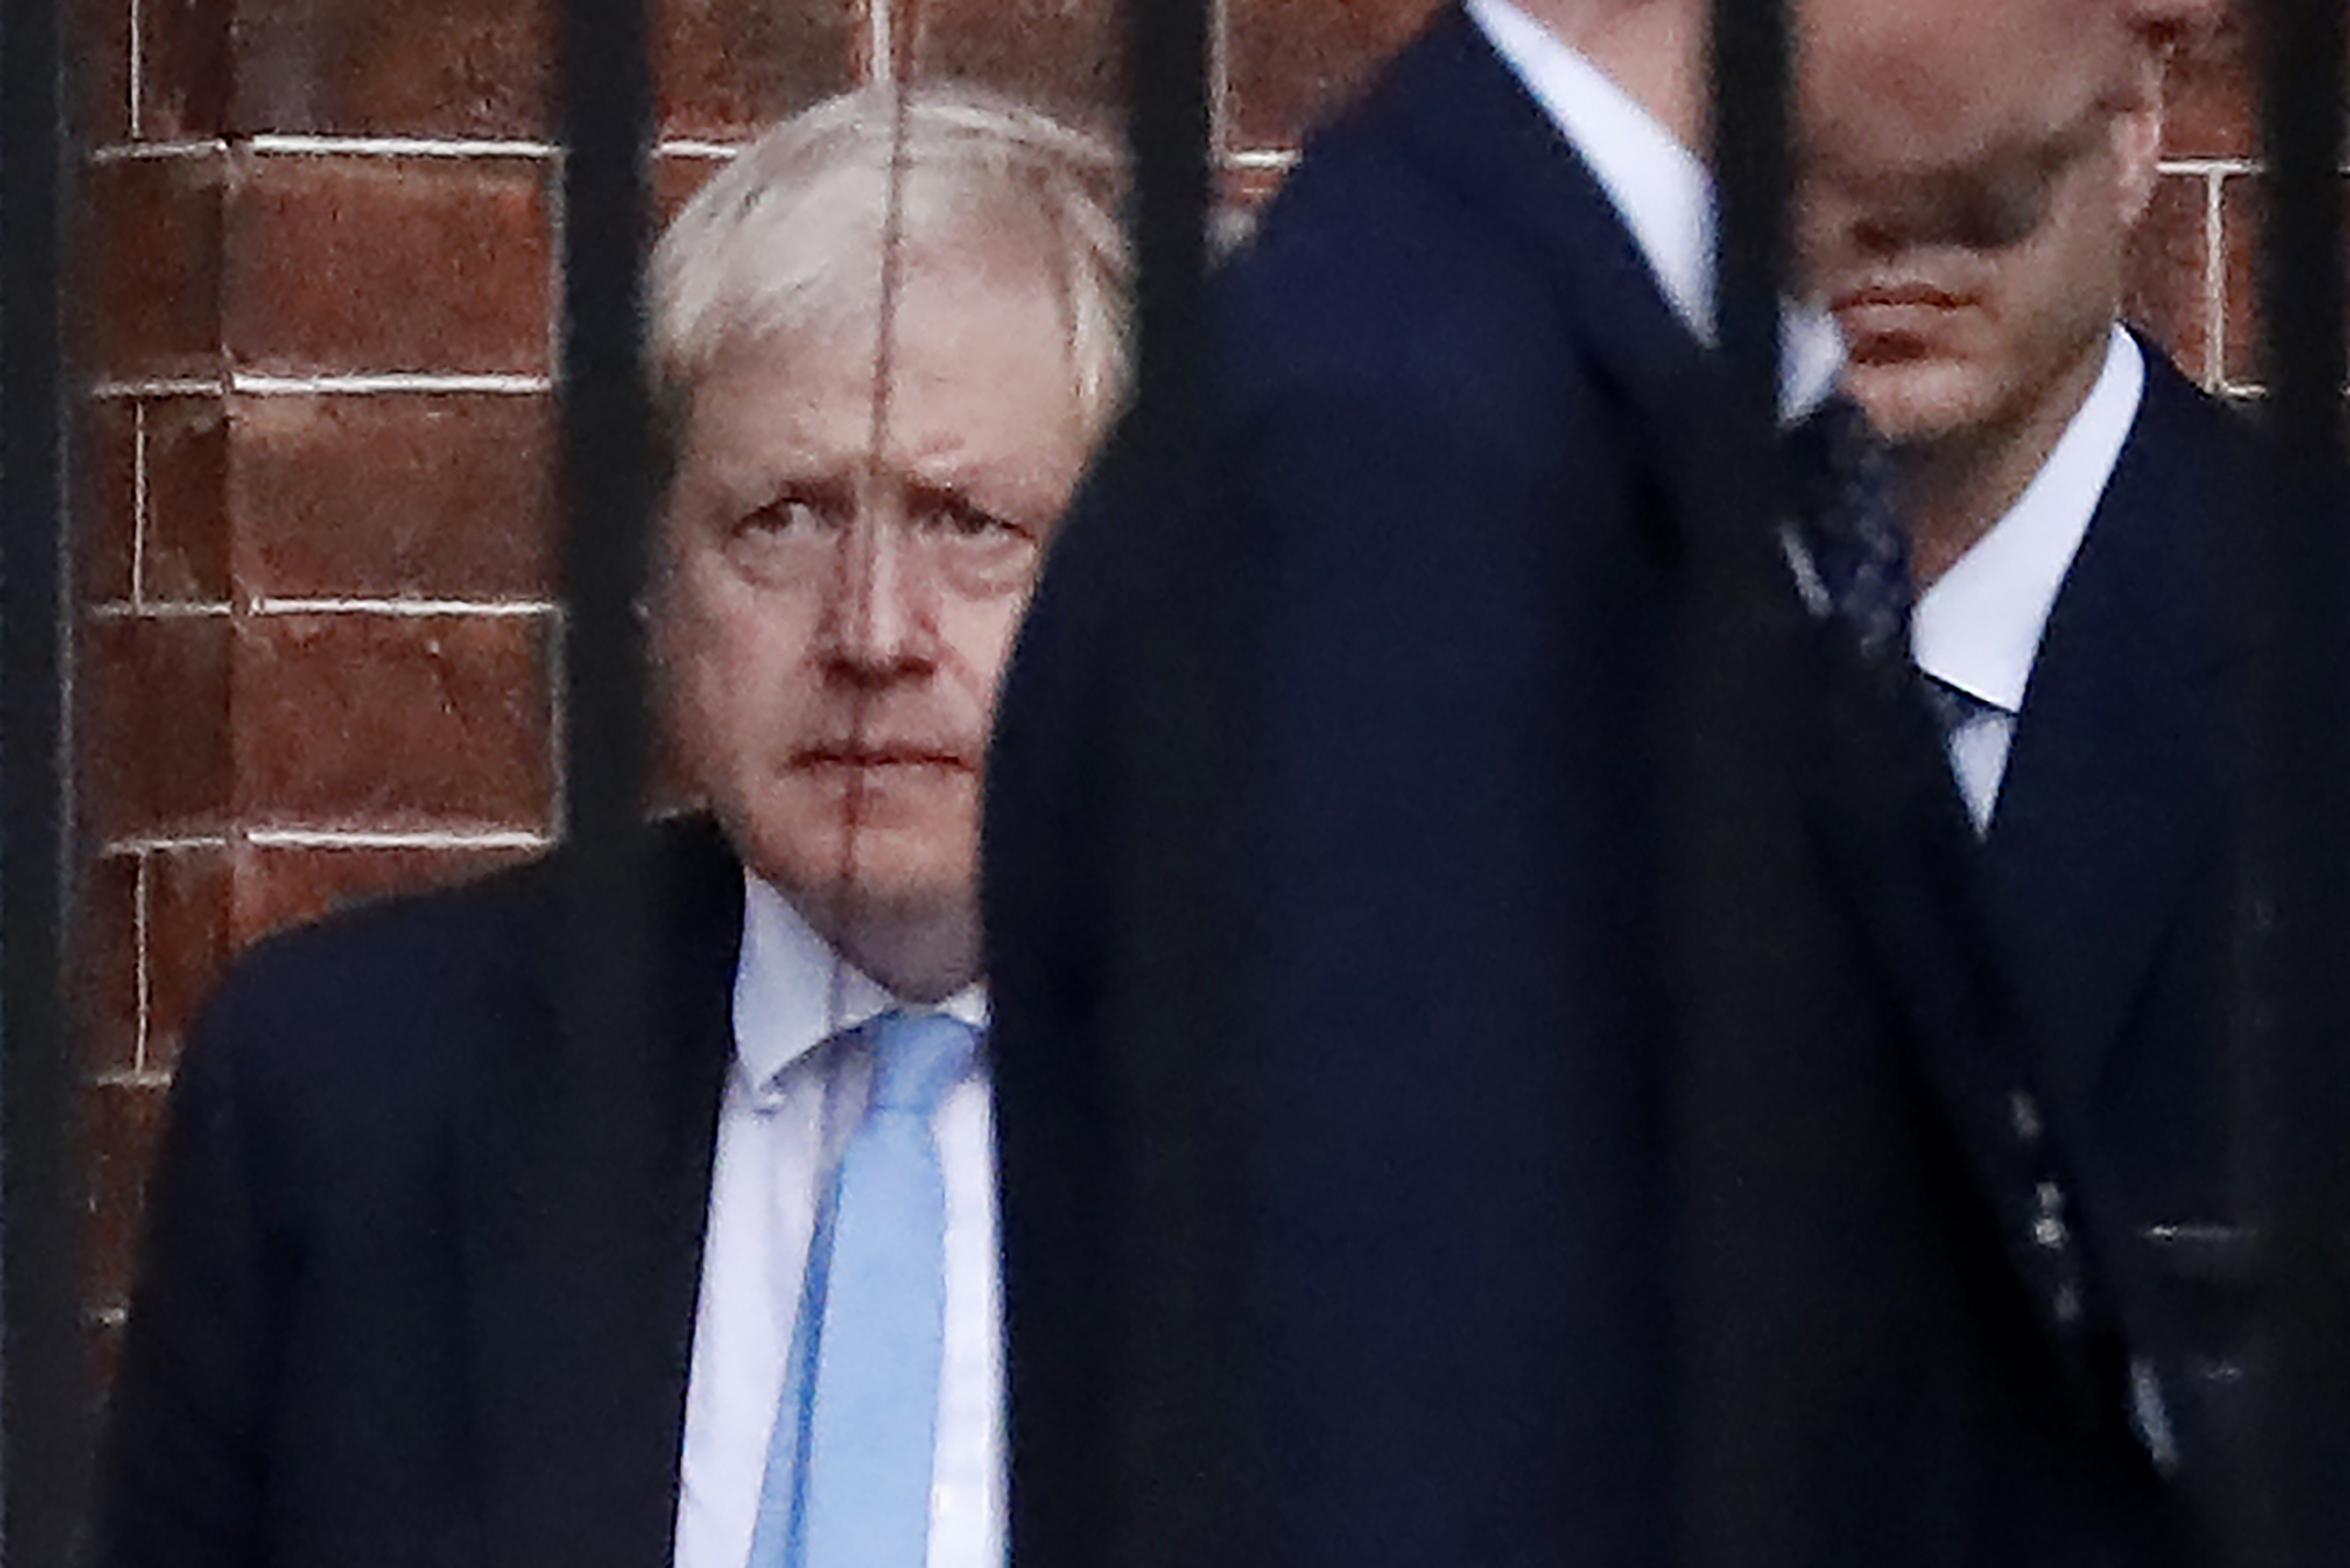 PHOTO: Britain's Prime Minister Boris Johnson (L) leaves from the rear of 10 Downing Street in central London on October 16, 2019.